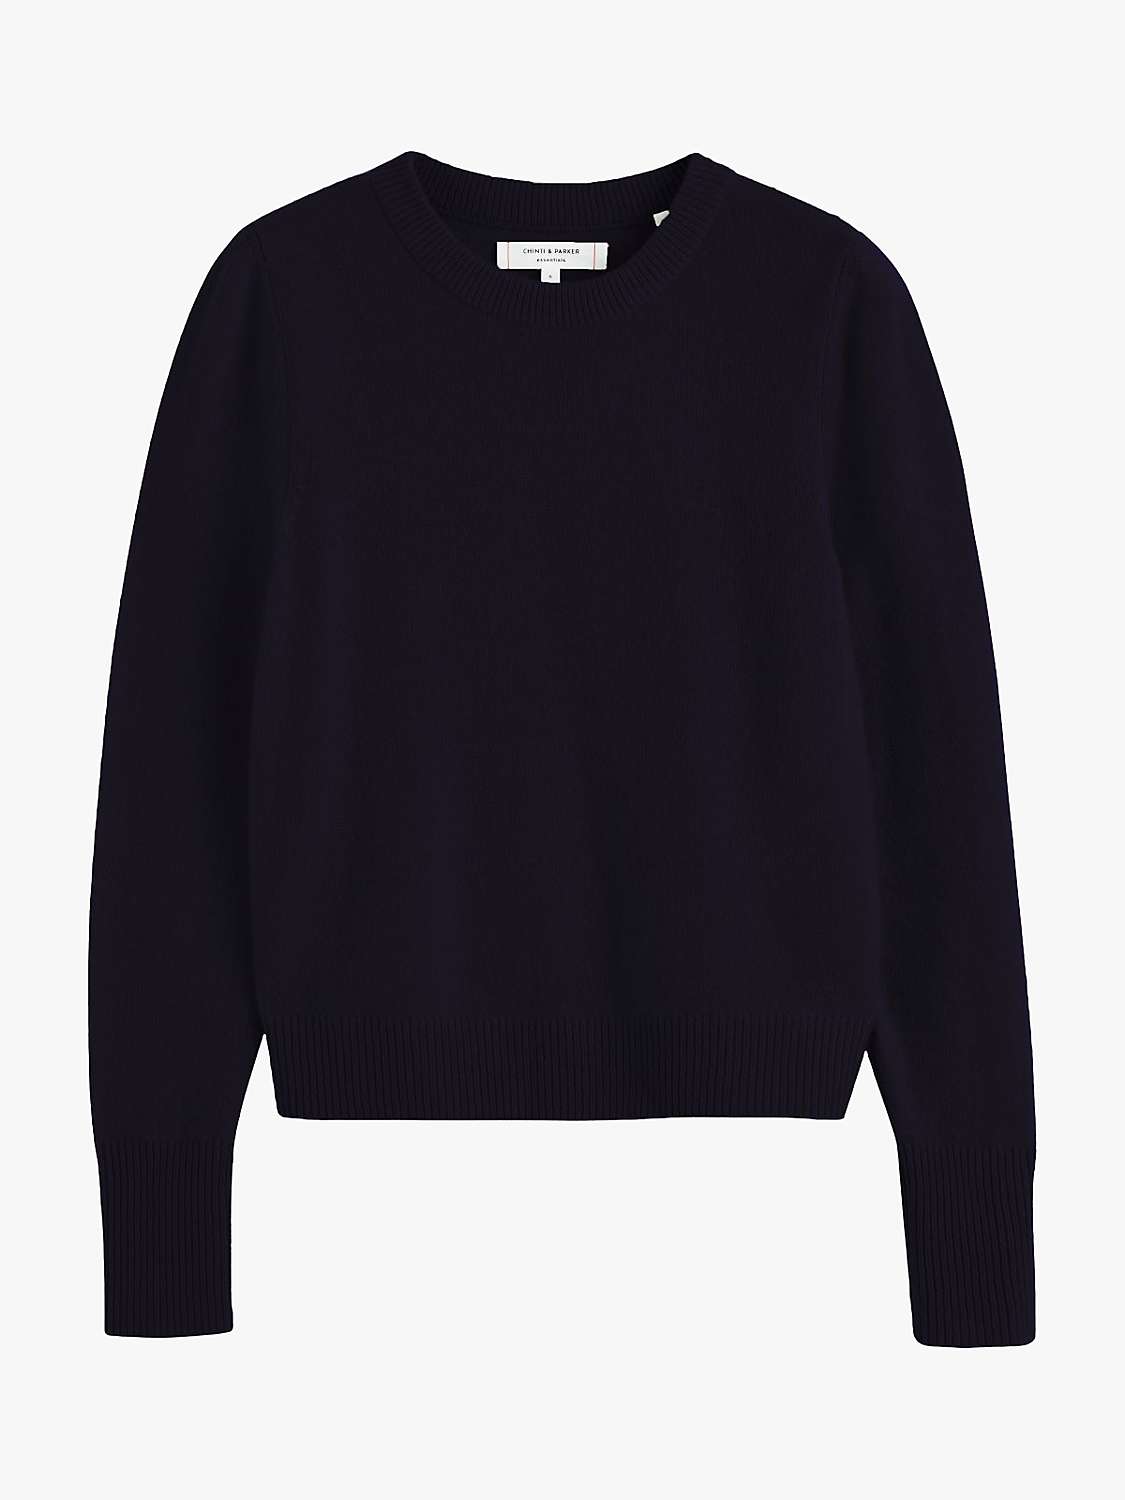 Buy Chinti & Parker Cashmere Cropped Jumper, Navy Online at johnlewis.com